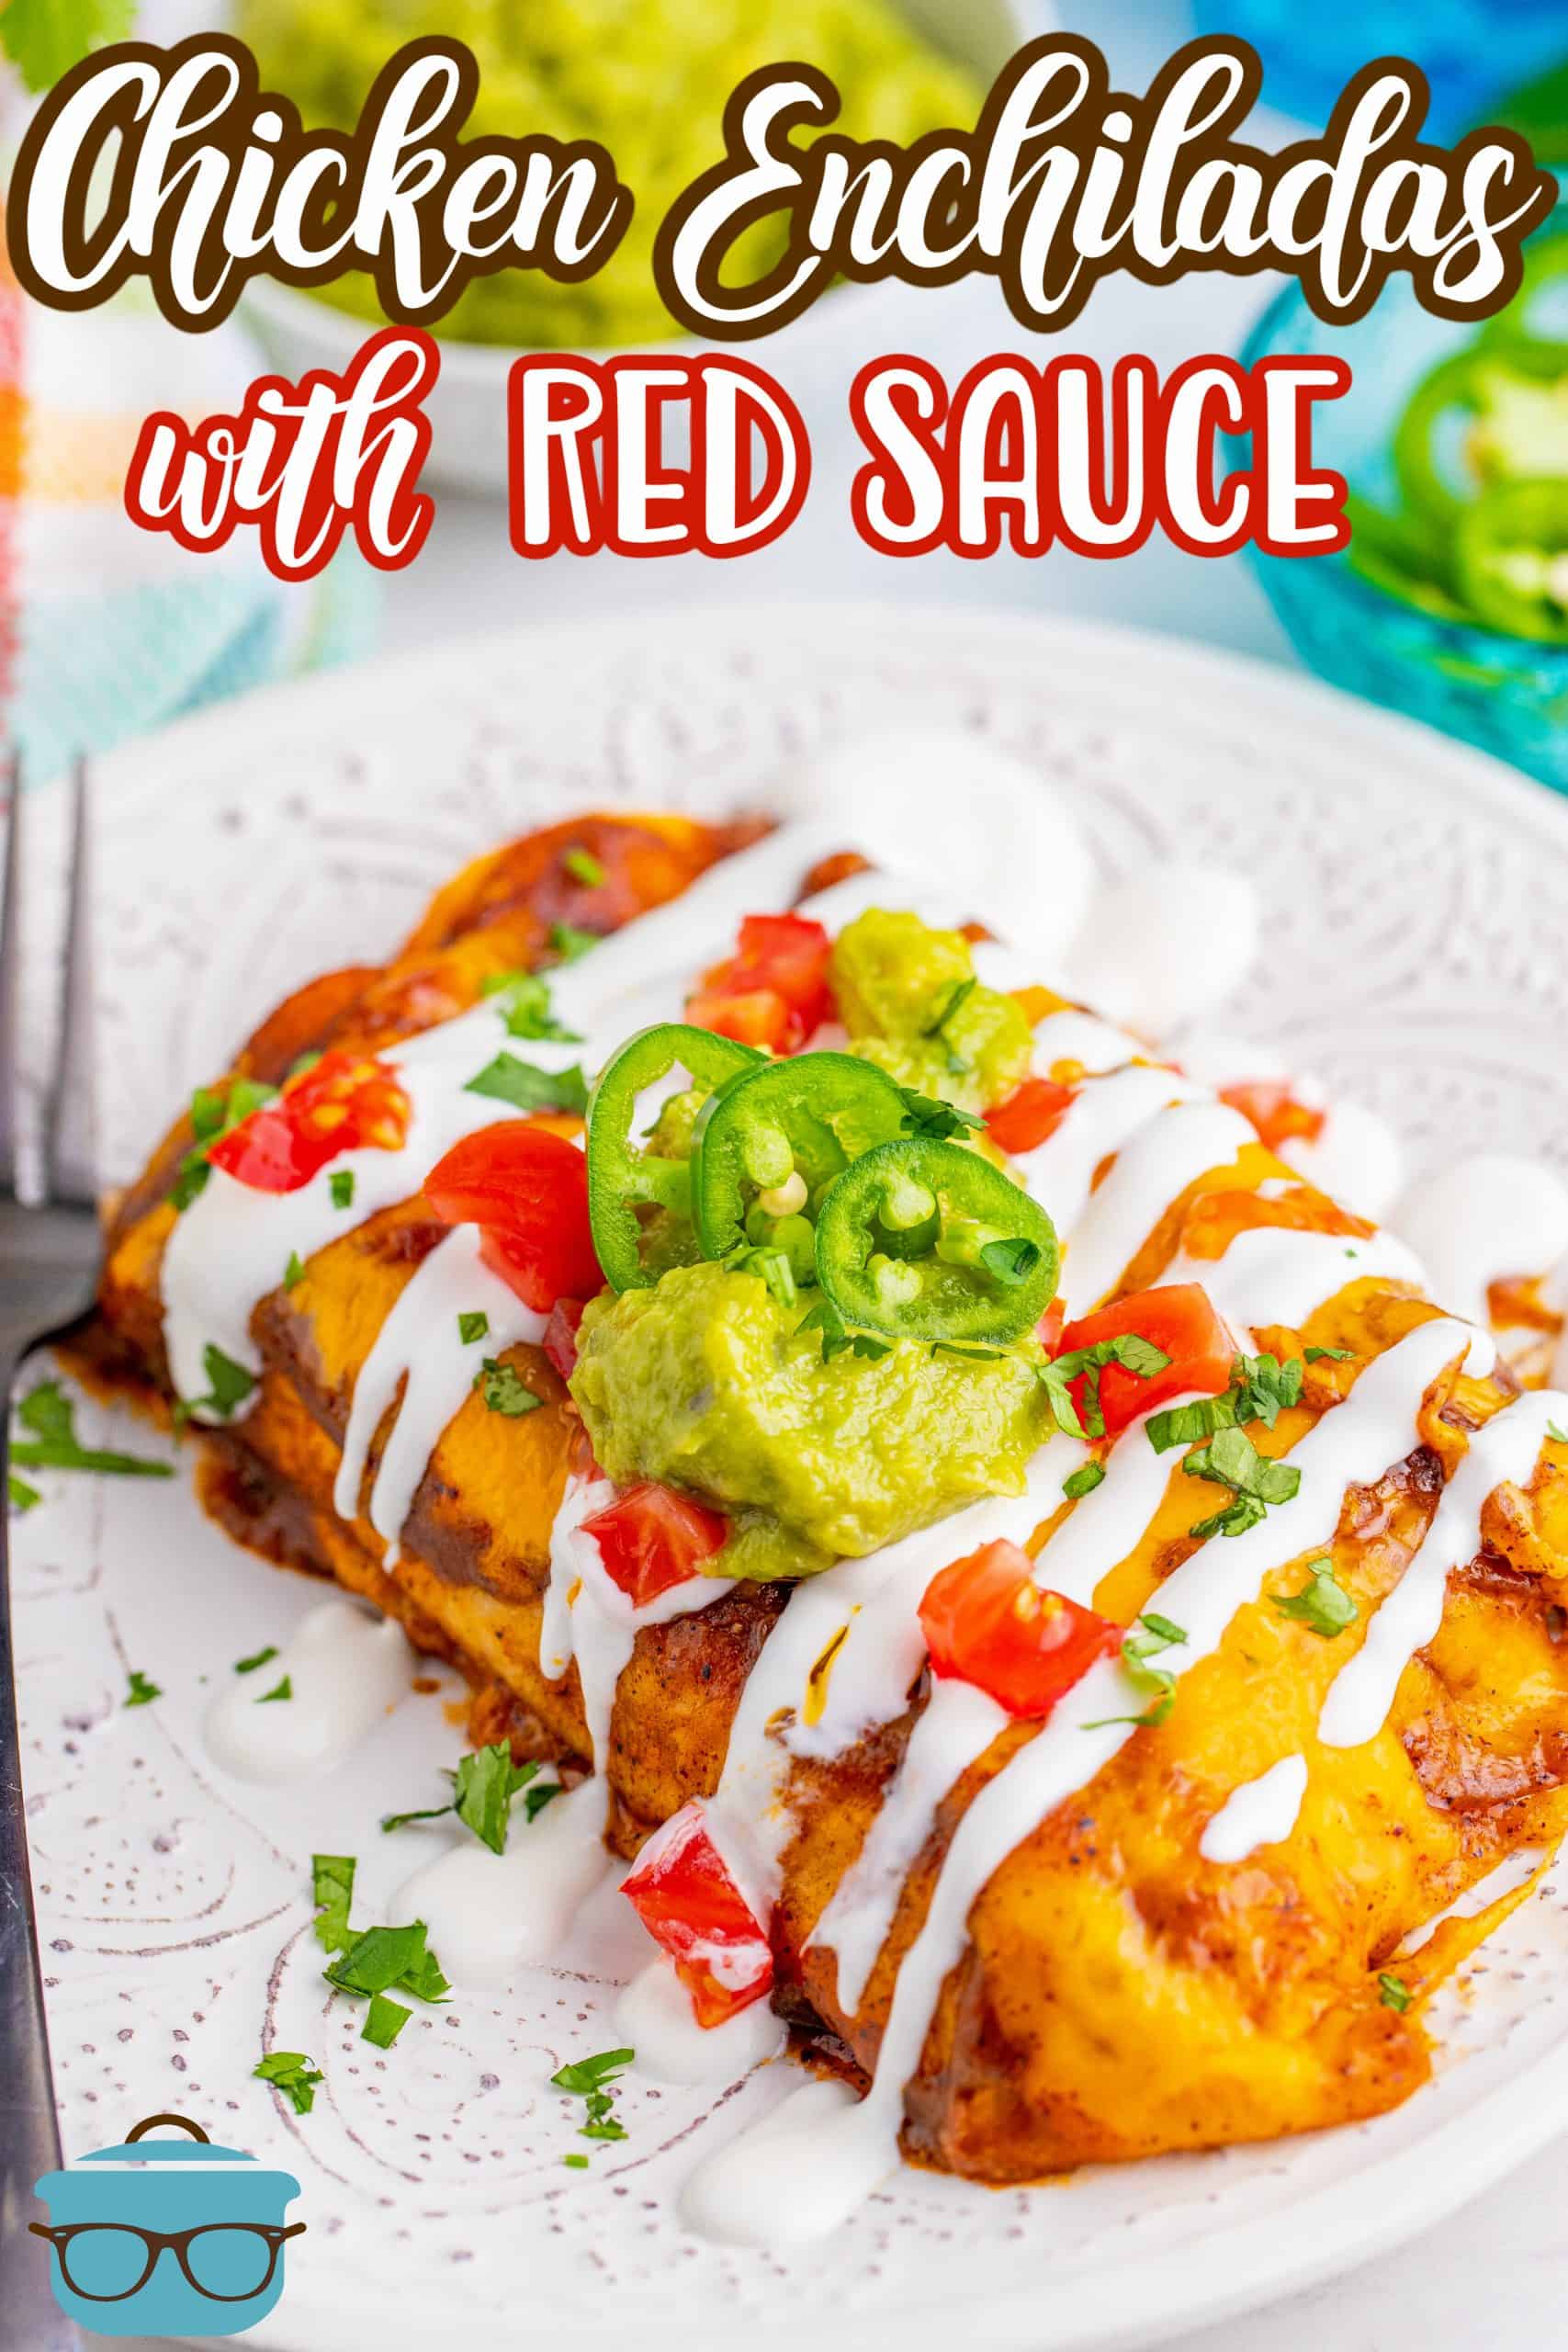 Chicken Enchiladas with homemade red enchilada sauce recipe from The Country Cook - two enchiladas shown on a white plate and topped with cream sauce, diced tomatoes, guacamole and fresh jalapeños. 